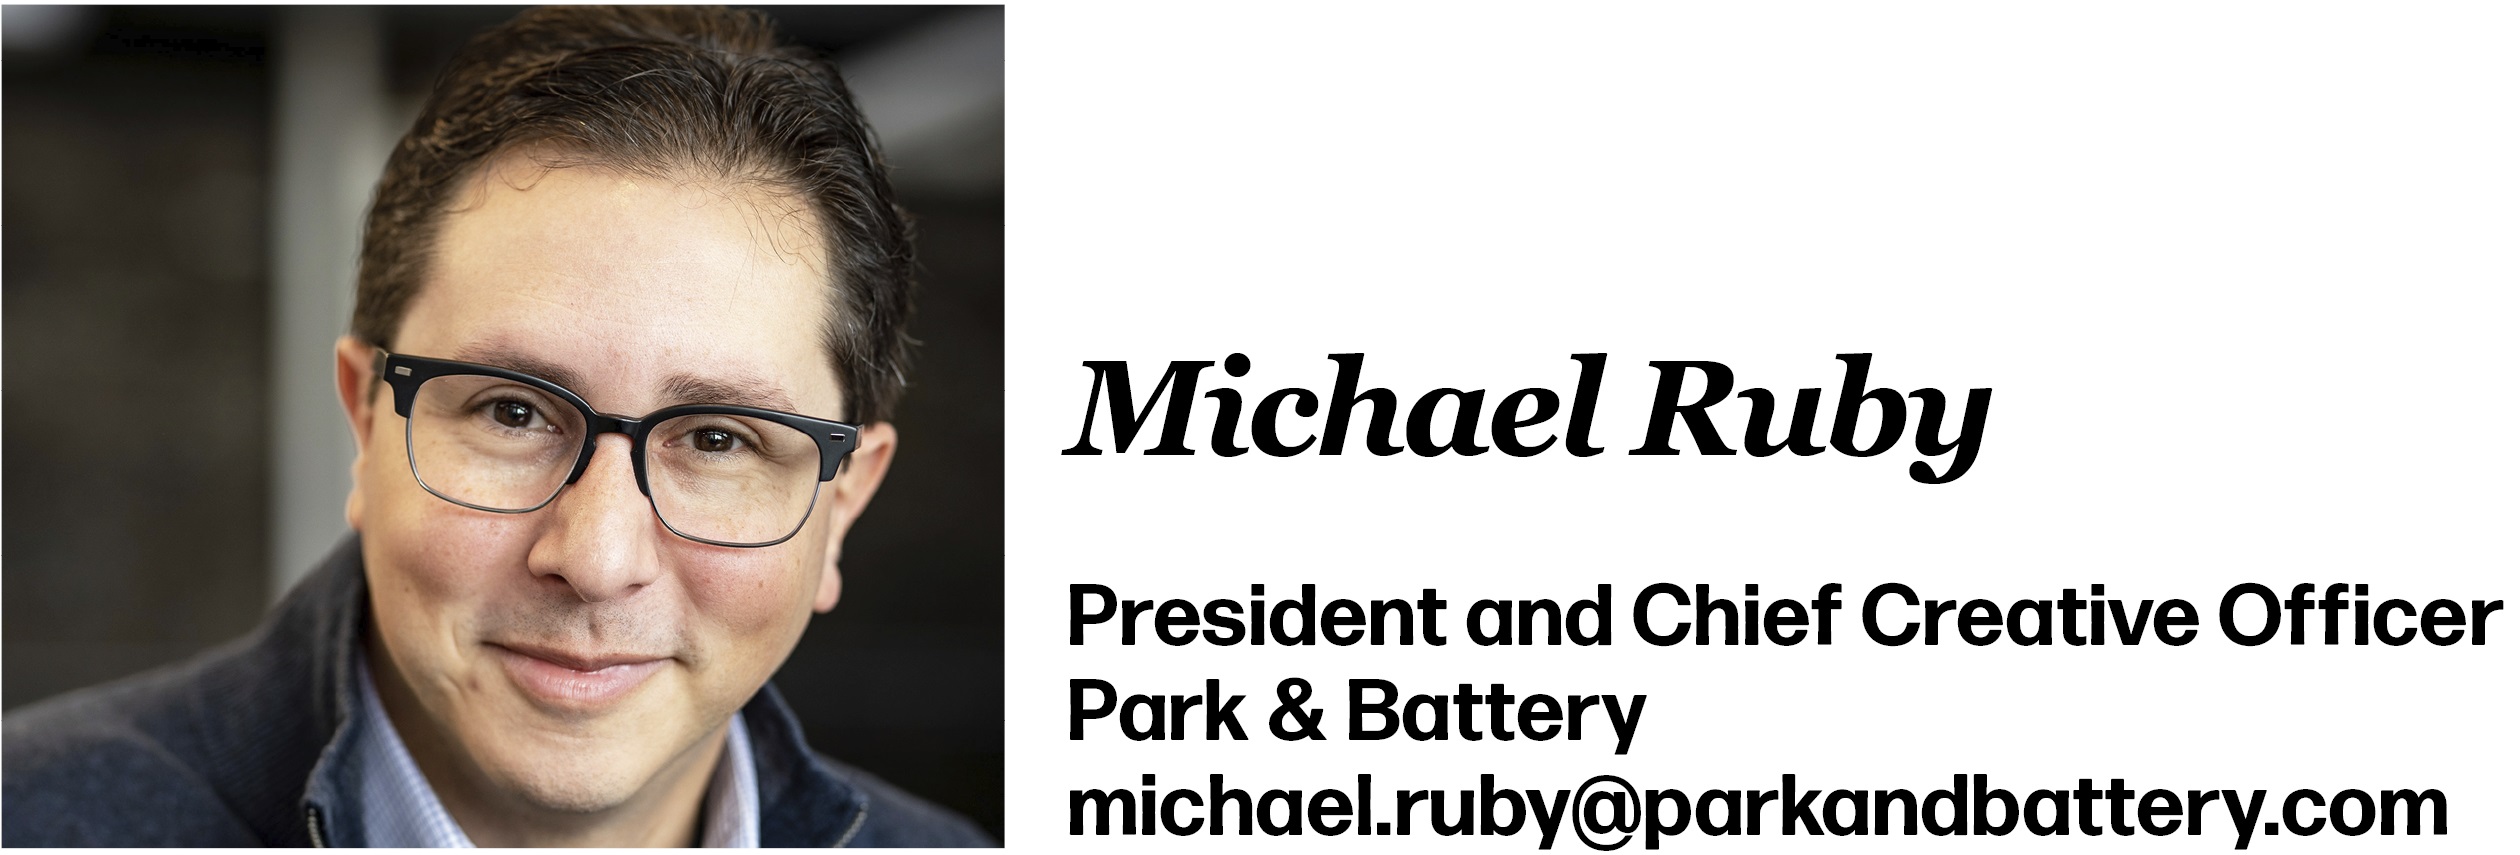 Michael Ruby President and Chief Creative Officer Park & Battery michael.ruby@parkandbattery.com